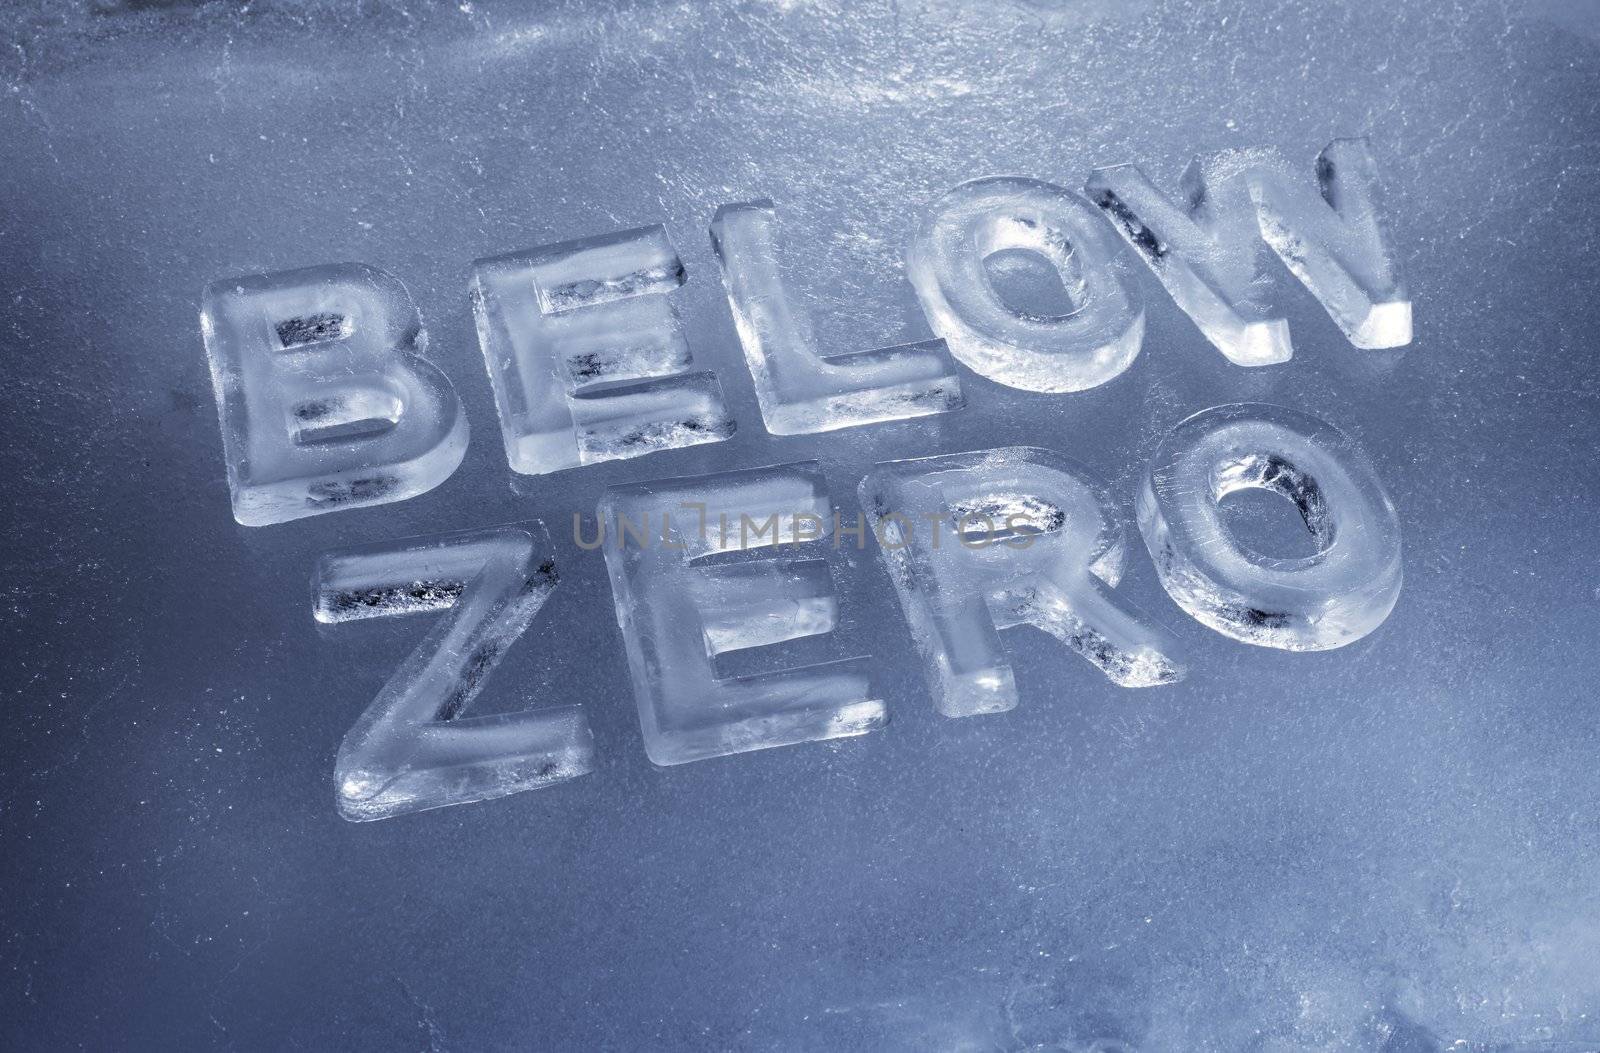 Words Below Zero made of real ice letters.